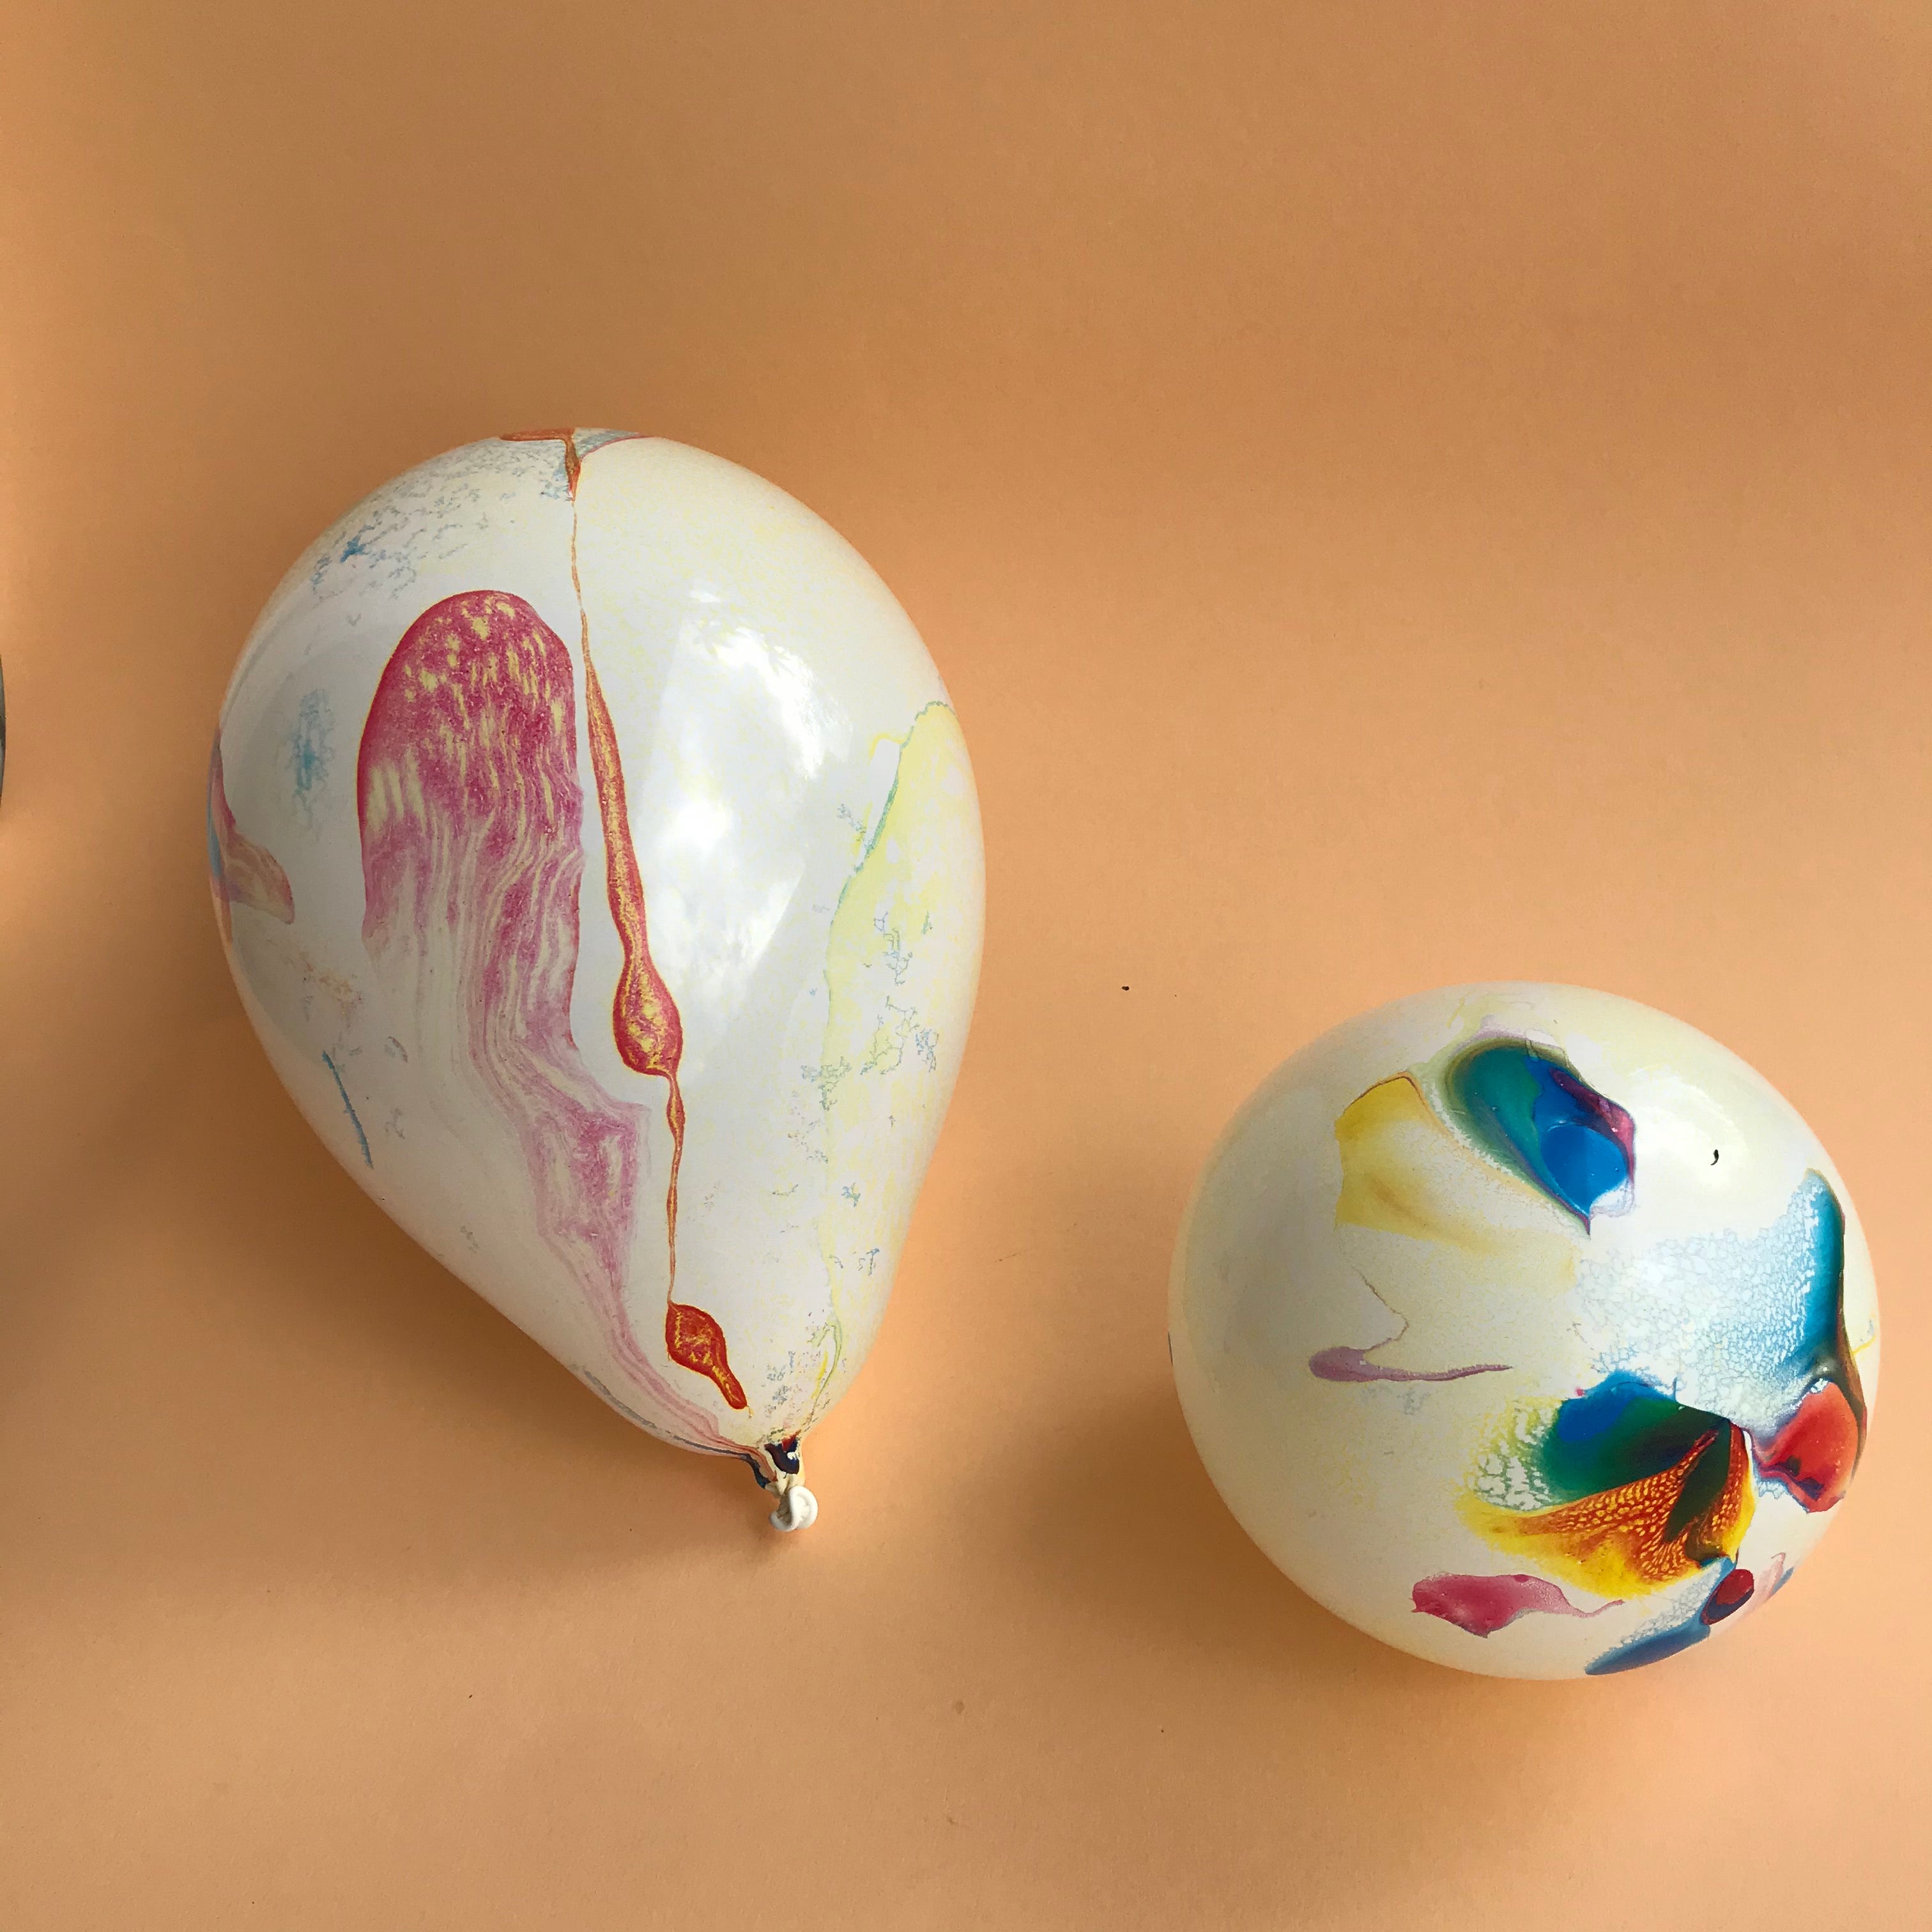 5 Marbled balloons